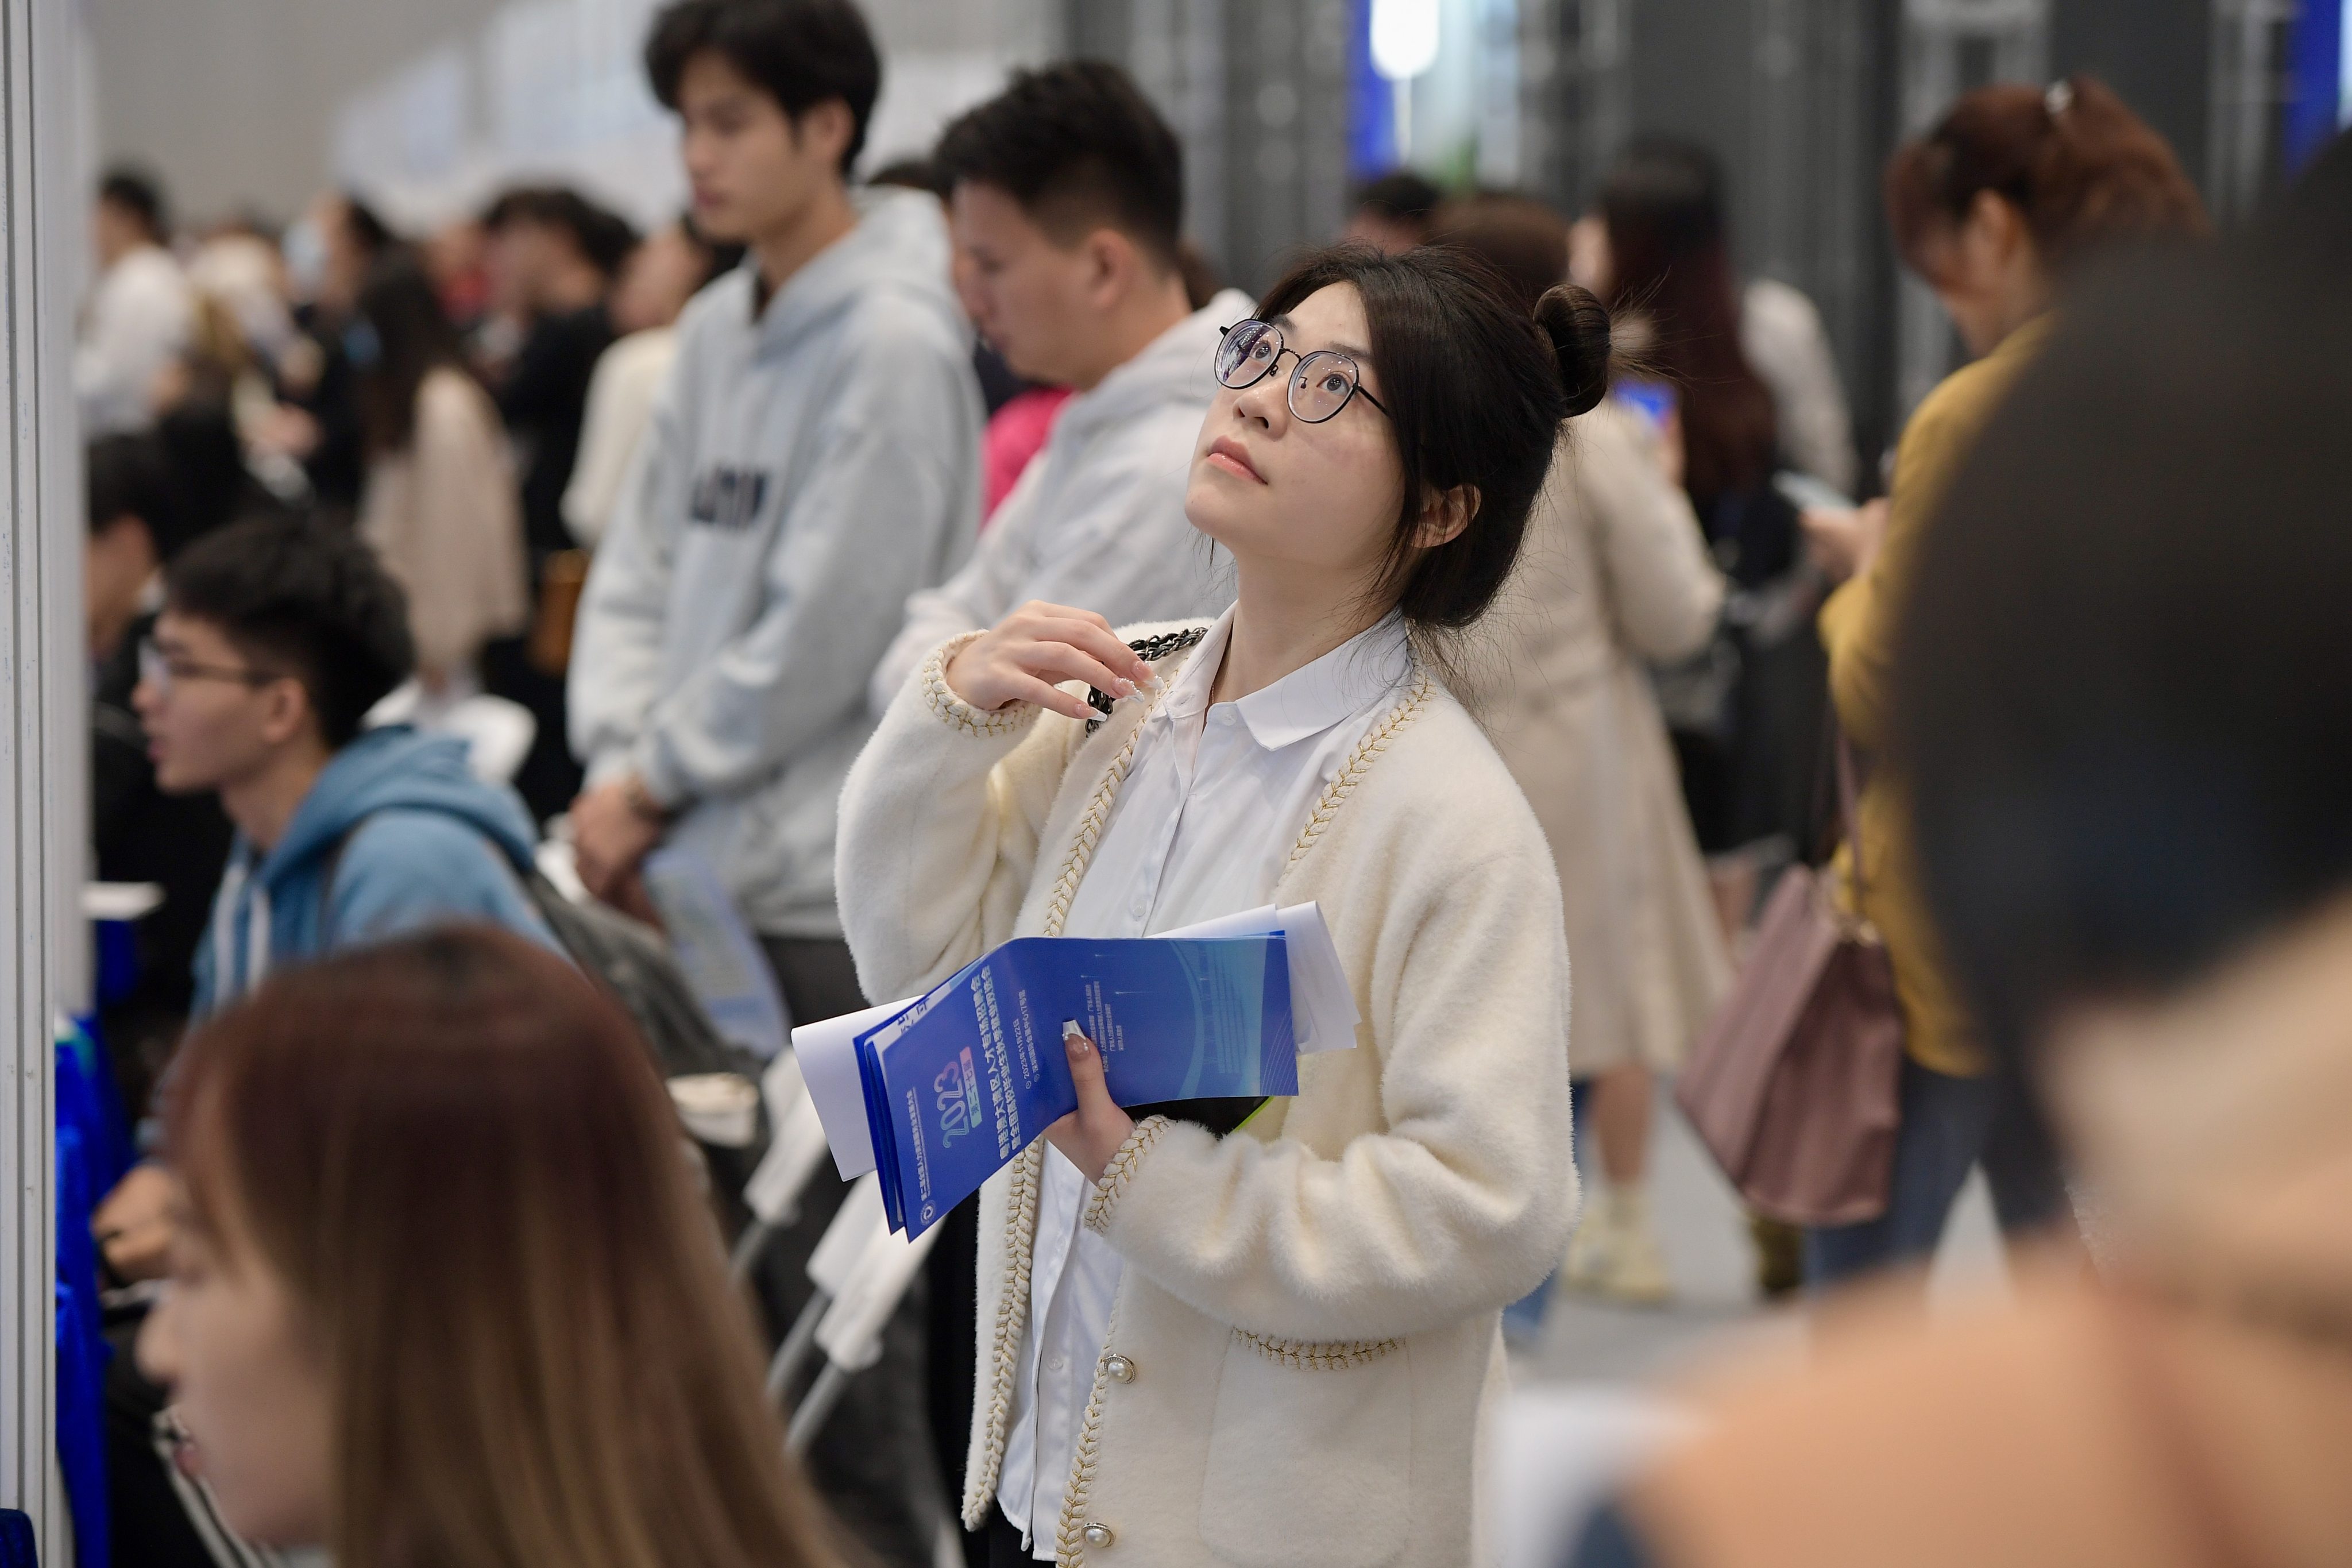 One analyst called the unemployment rise a “temporary blip” in Shenzhen’s job situation. Photo: Getty Images